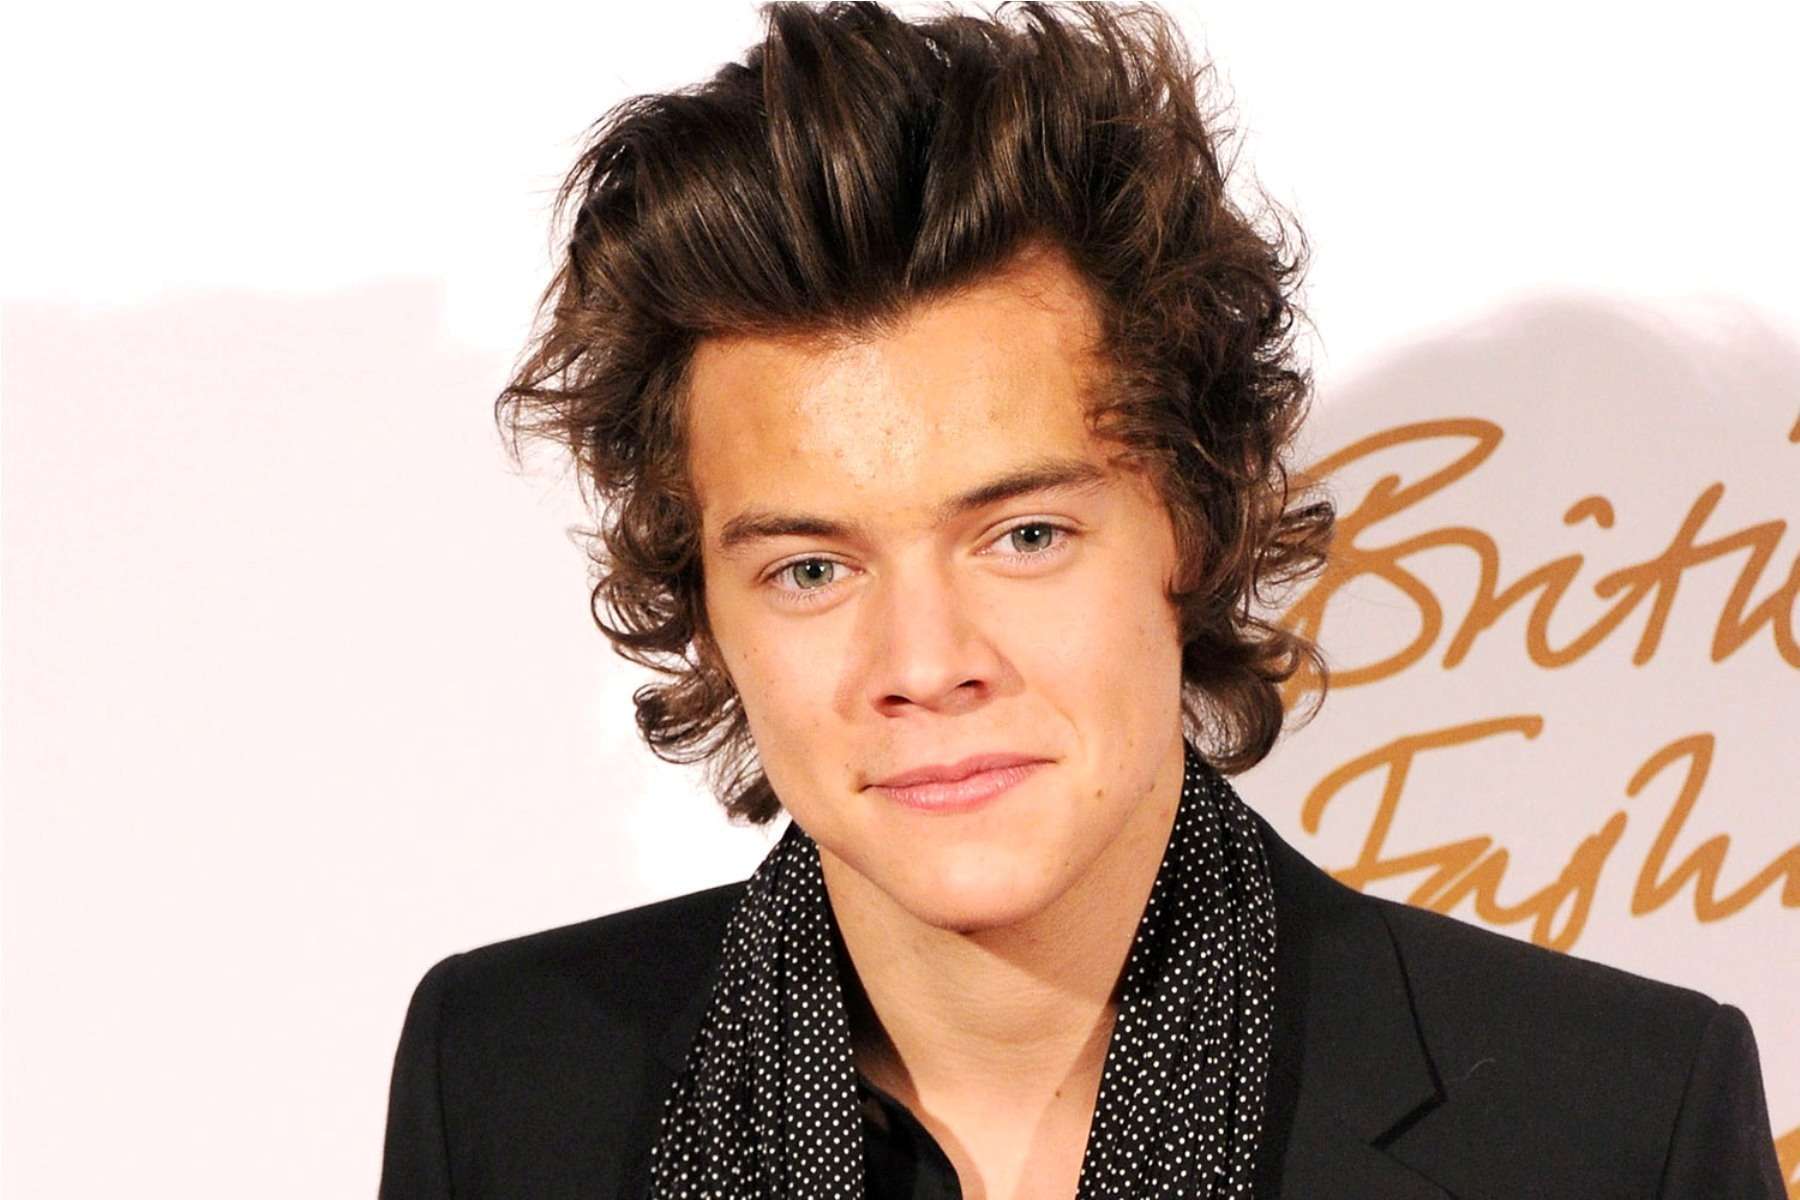 Harry Styles HD Pictures AMBWallpapers